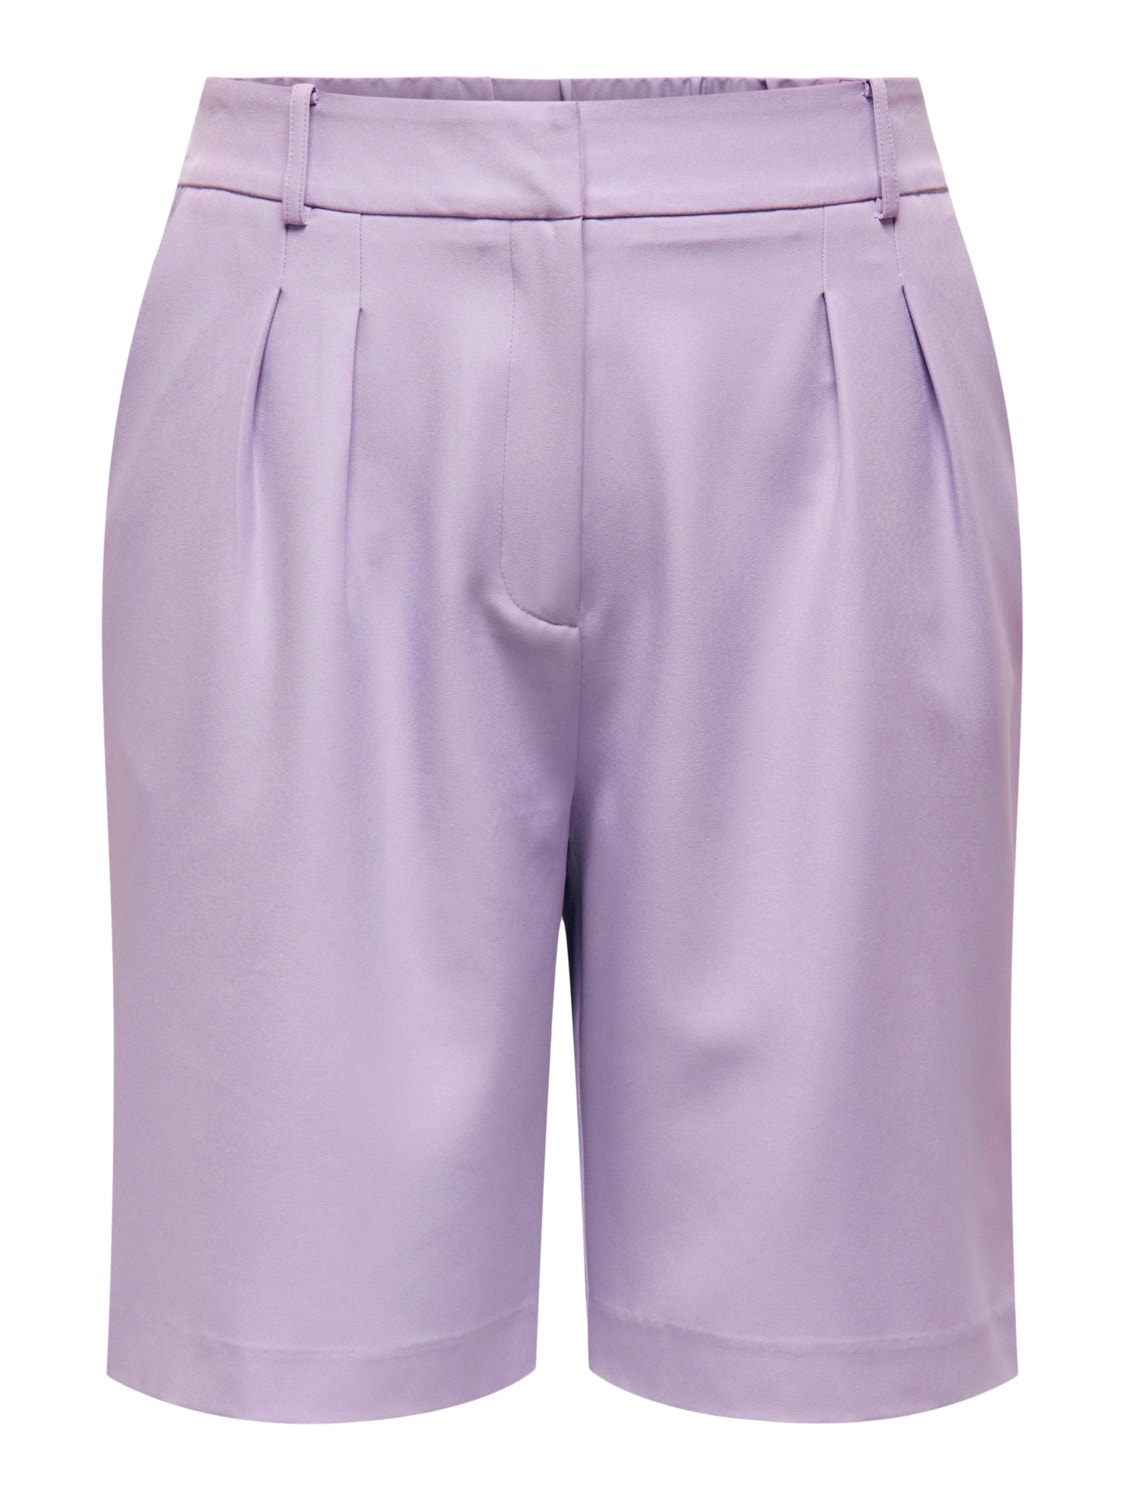 ONLY Normal geschnitten Curve Shorts -Purple Rose - 15289365